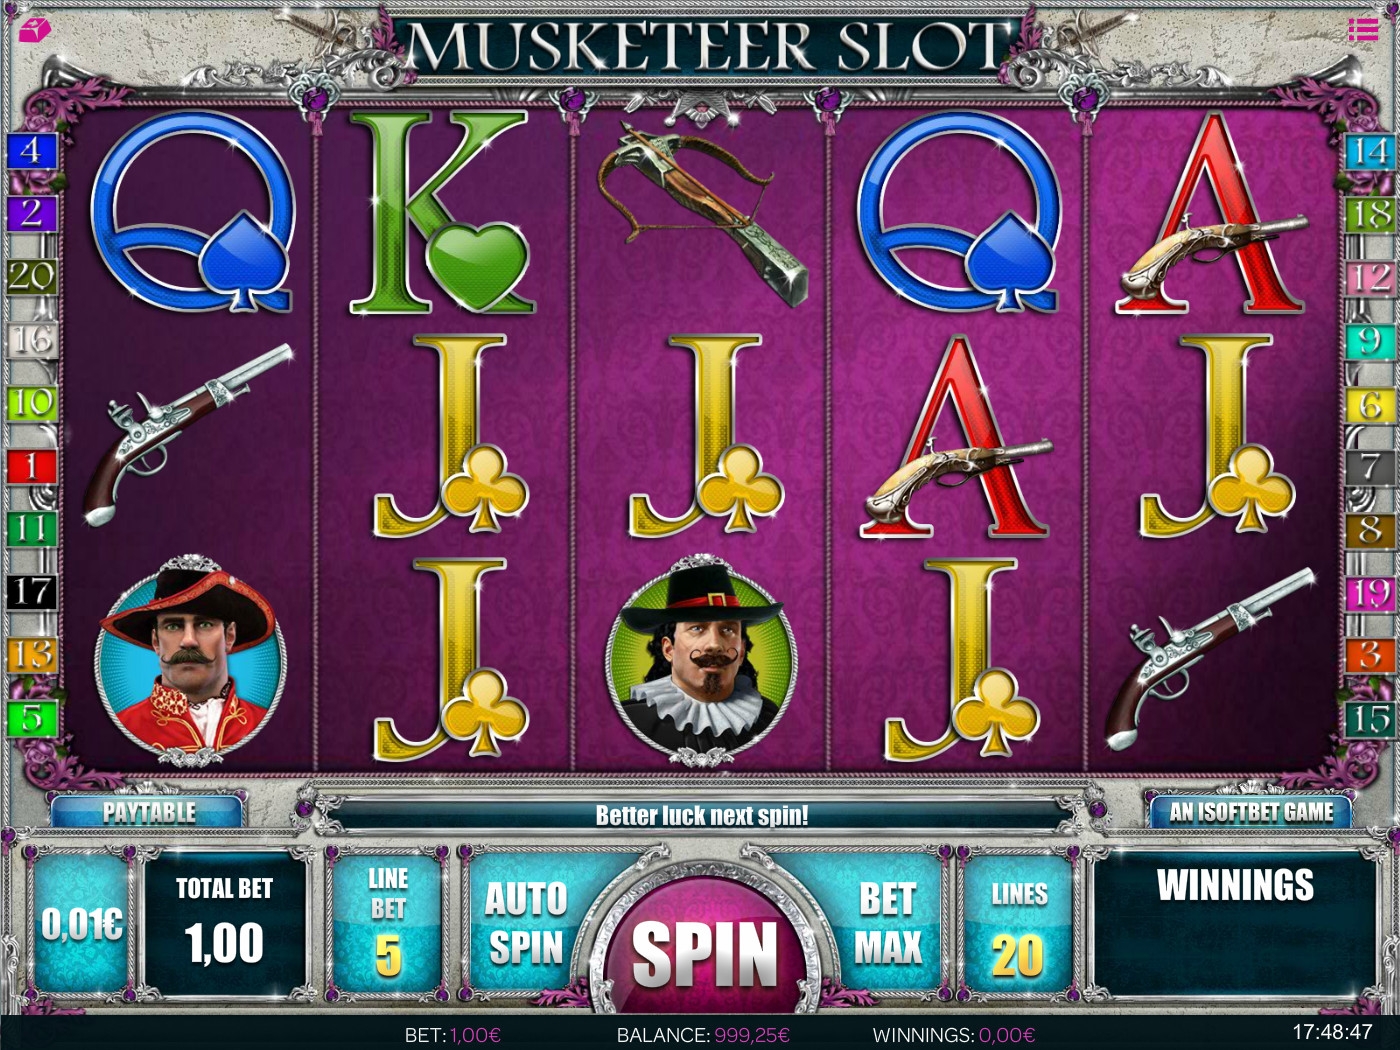 Musketeer Slot (Musketeer Slot) from category Slots